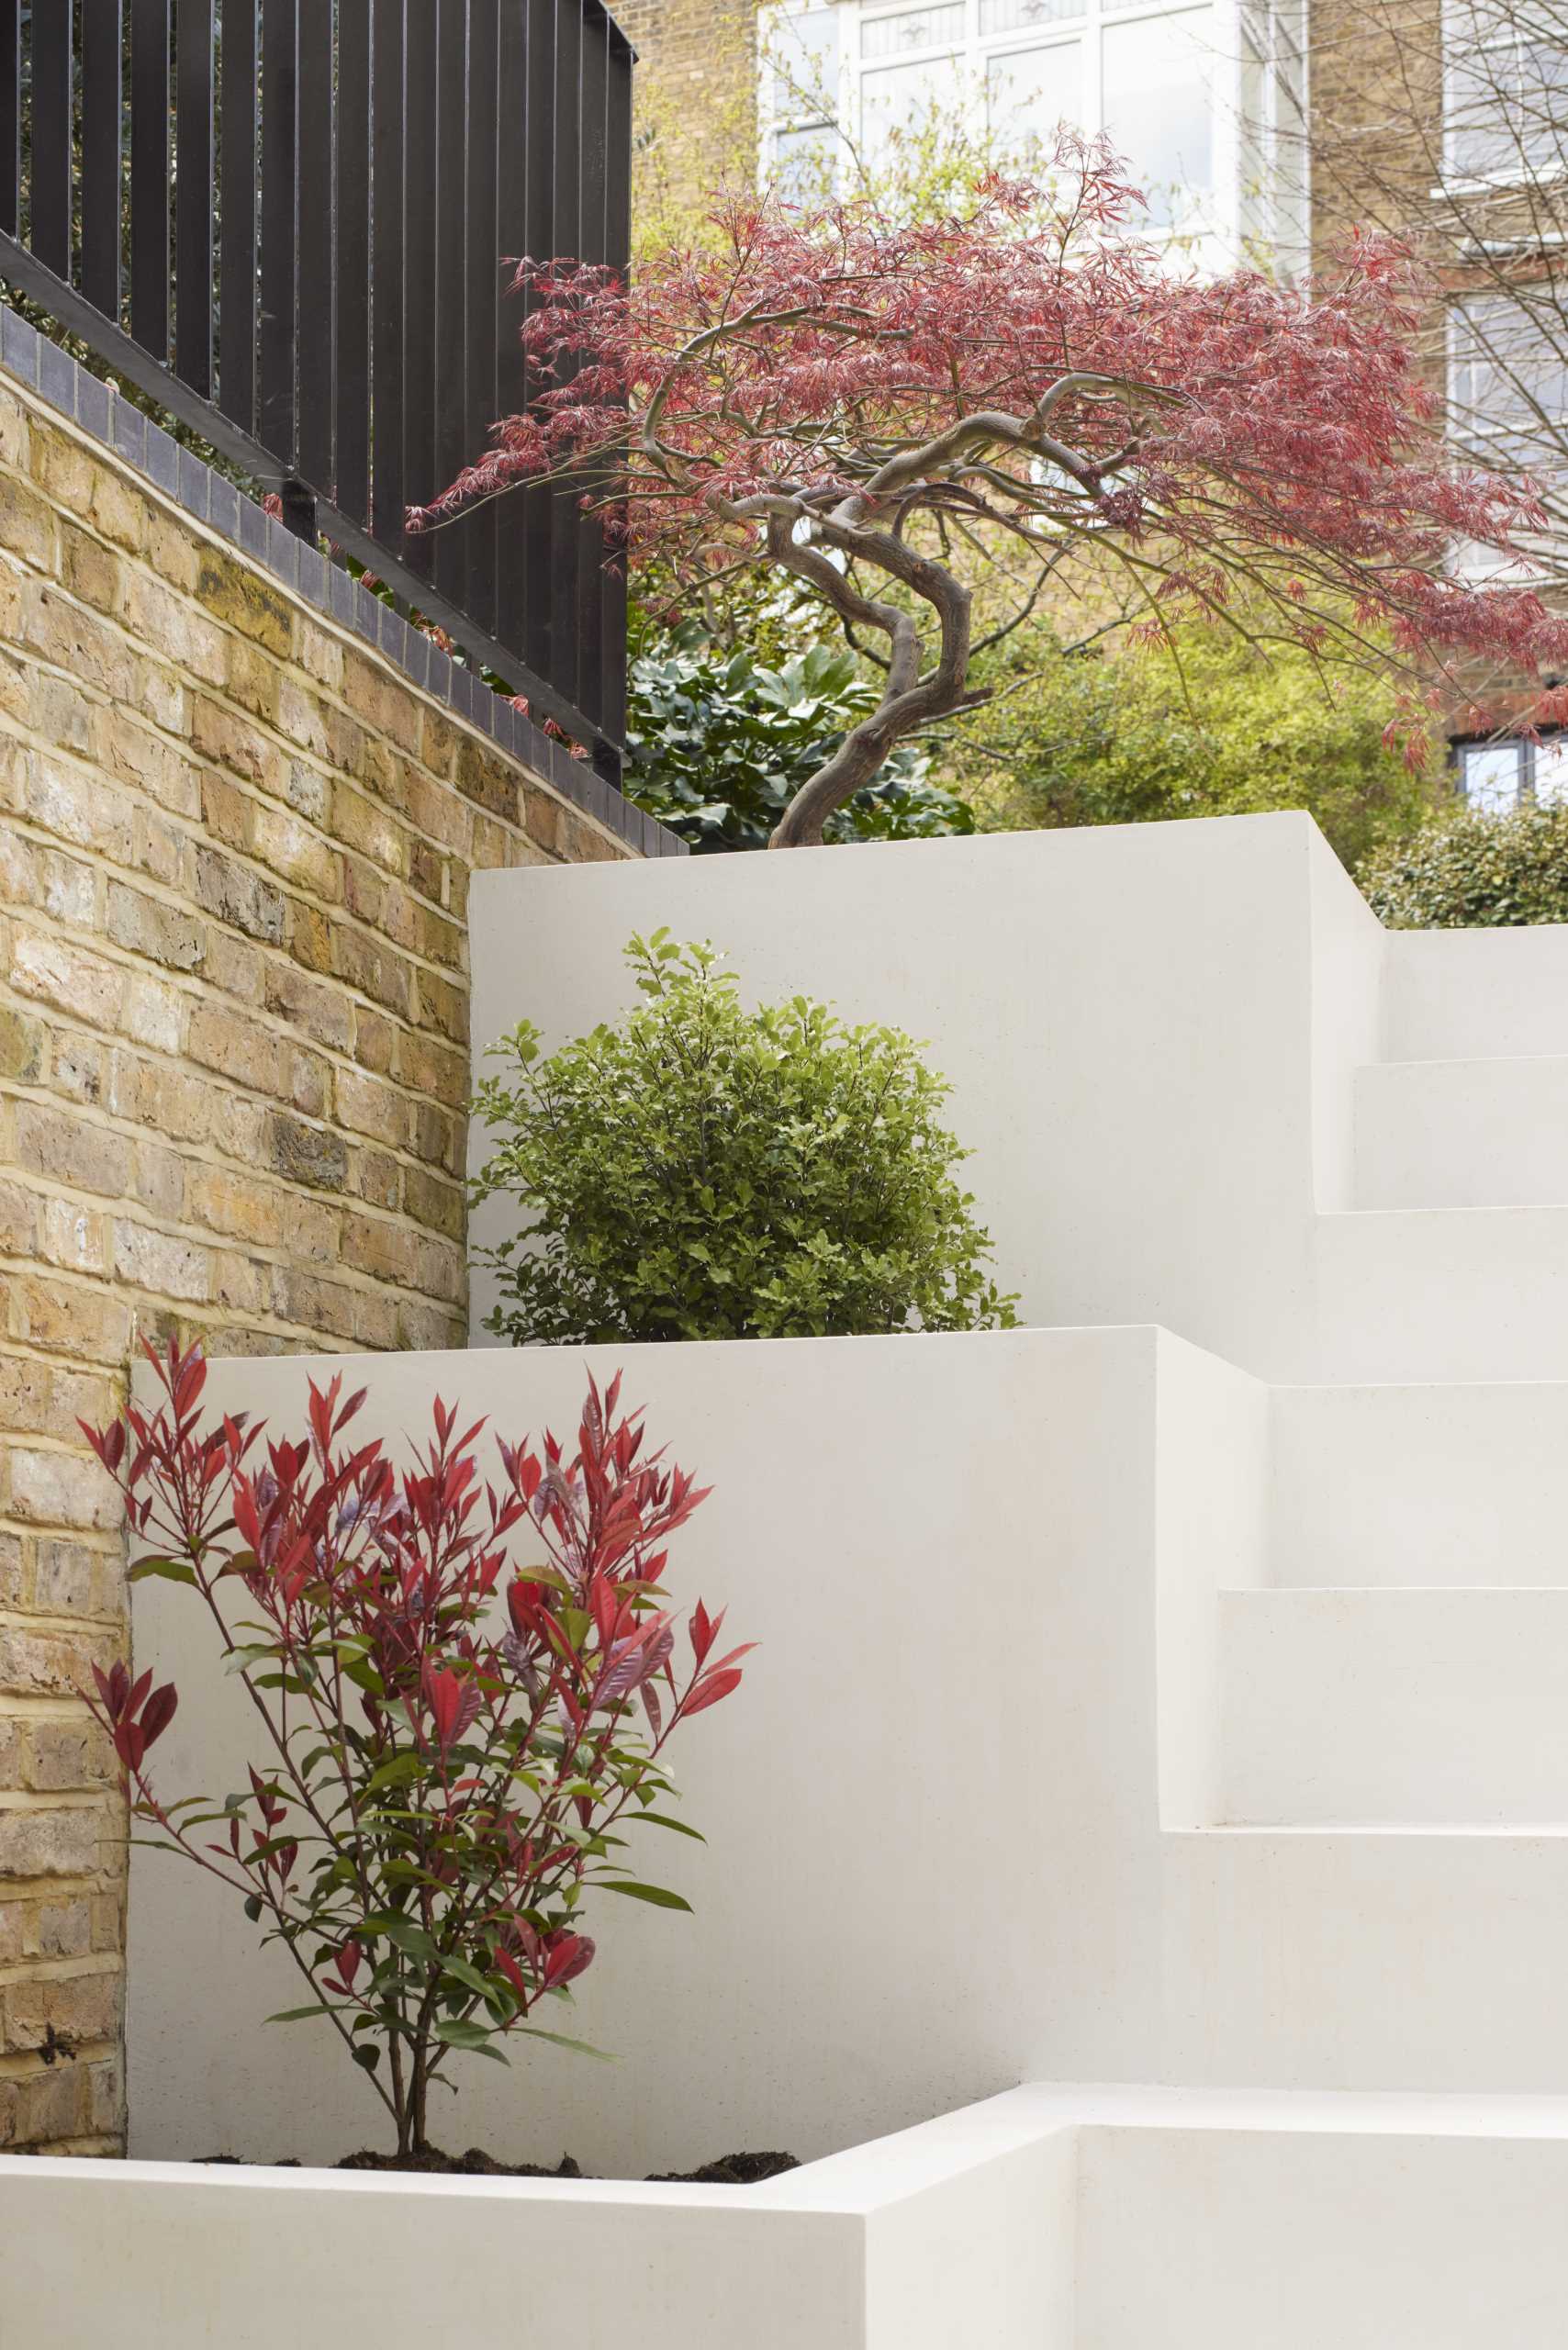 Outdoor stairs with built-in planters filled with small trees and shrubs.